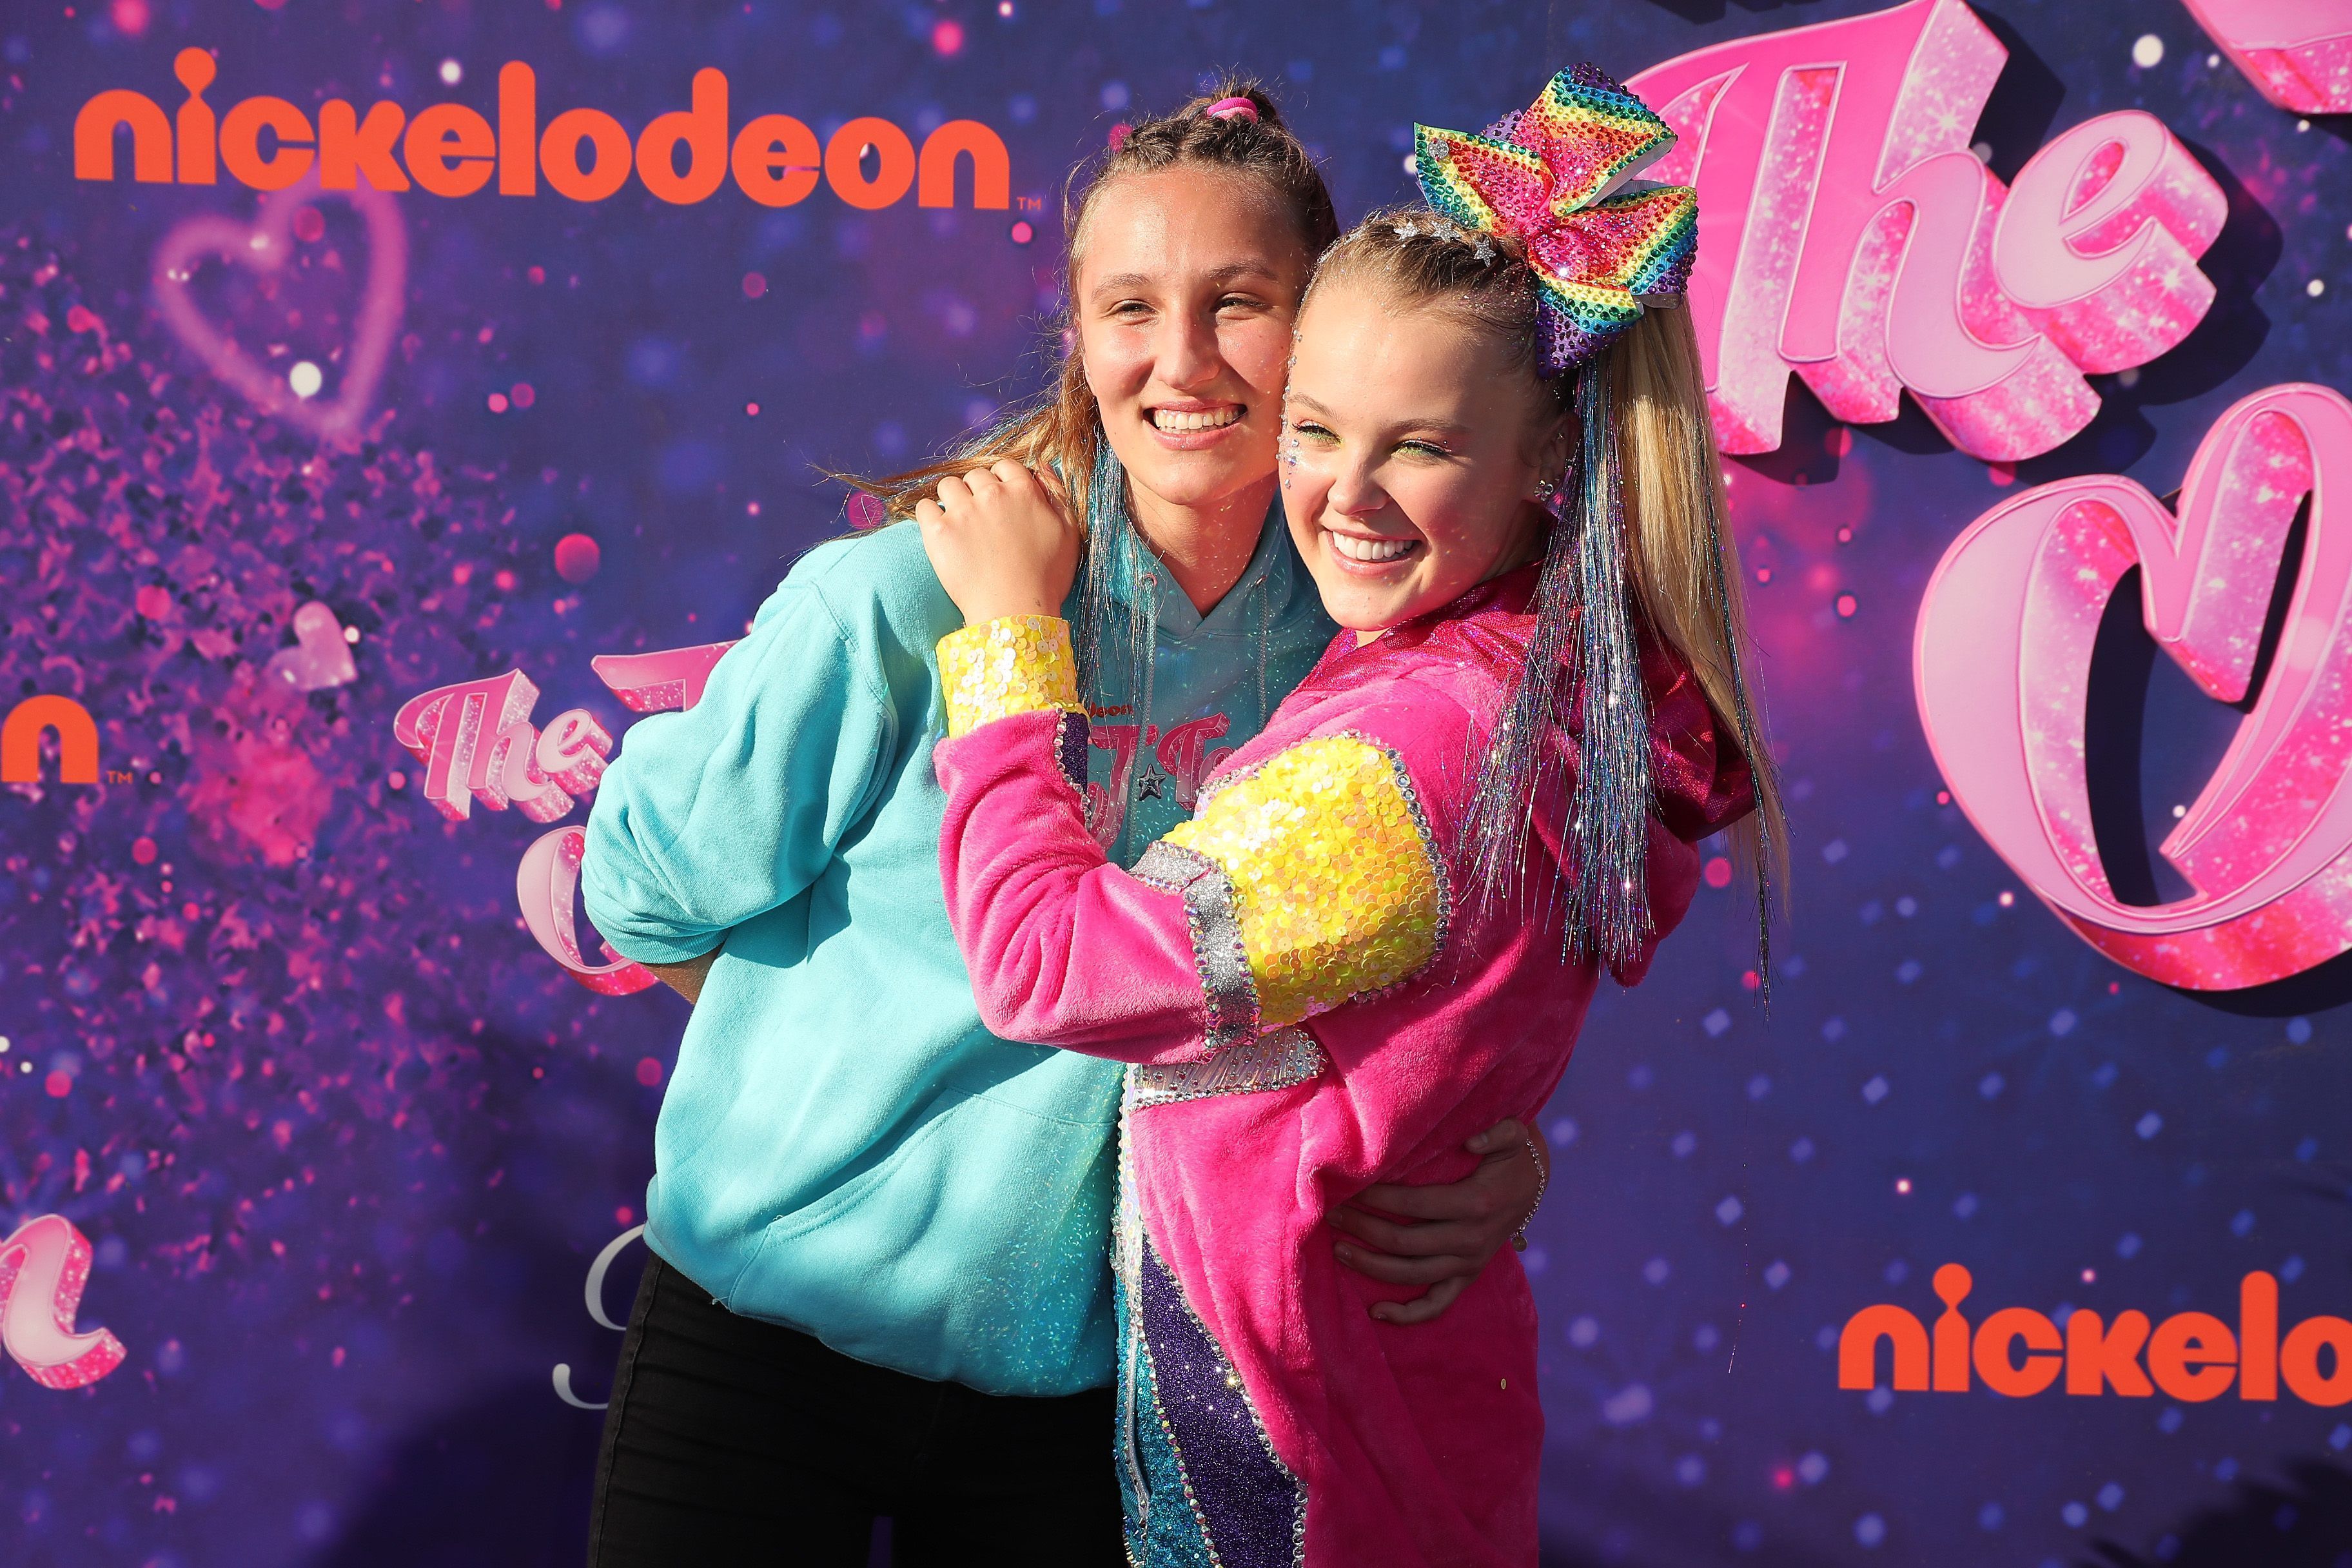 JoJo Siwa Says She's Great Friends with Avery Cyrus Amid Dating Rumors